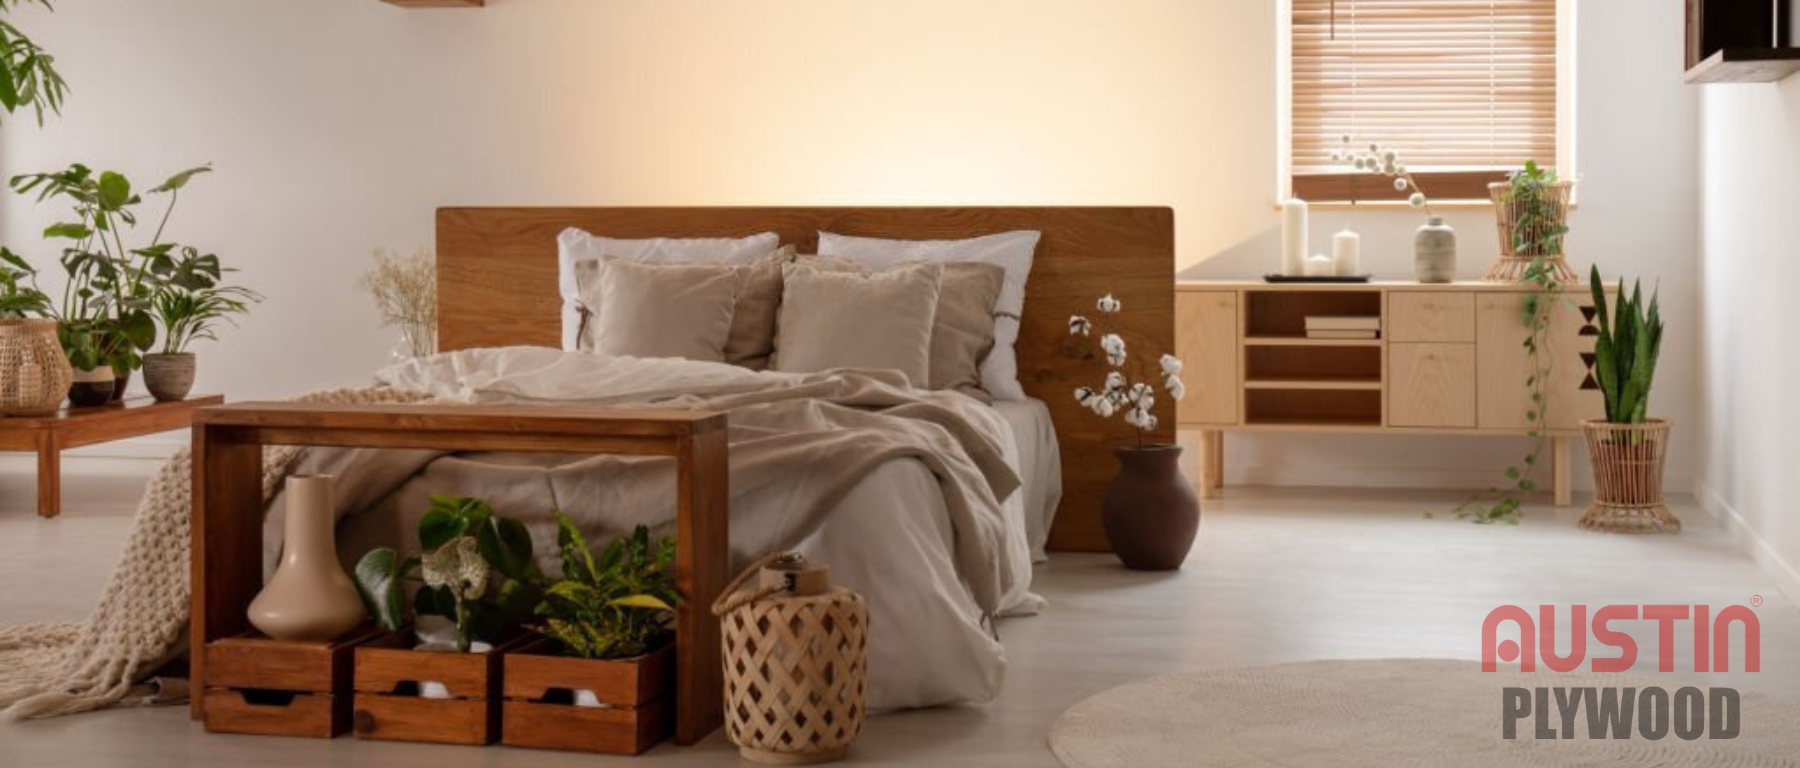 Best Plywood For Bed - Austin Plywood